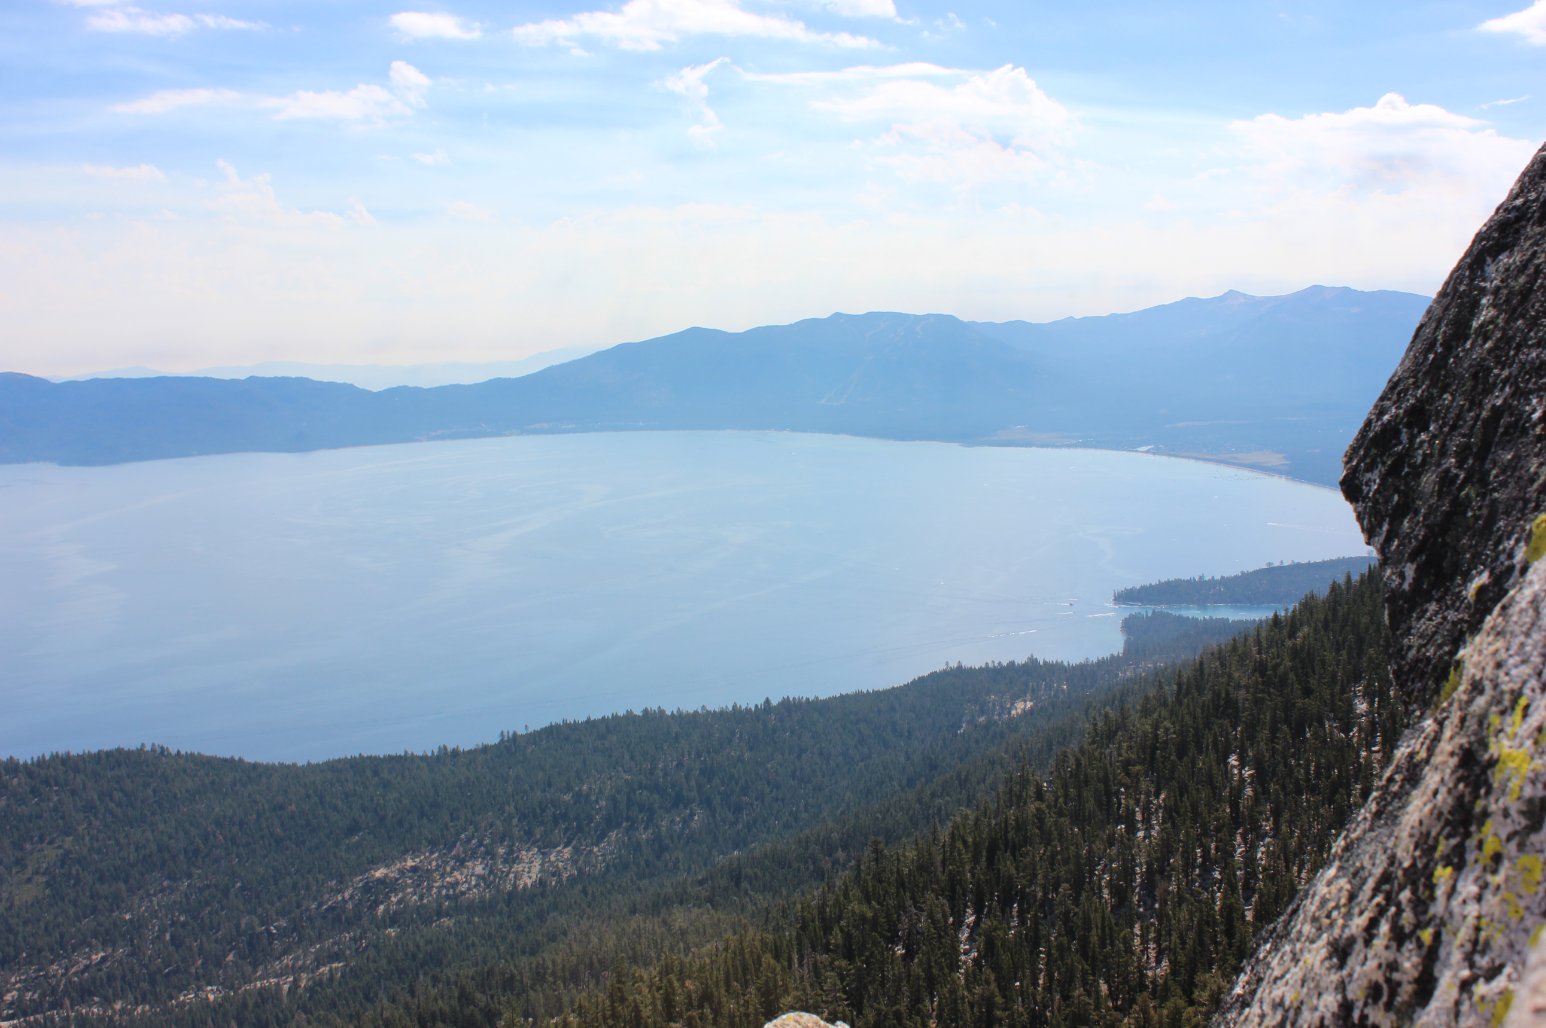 View of Tahoe from the peak